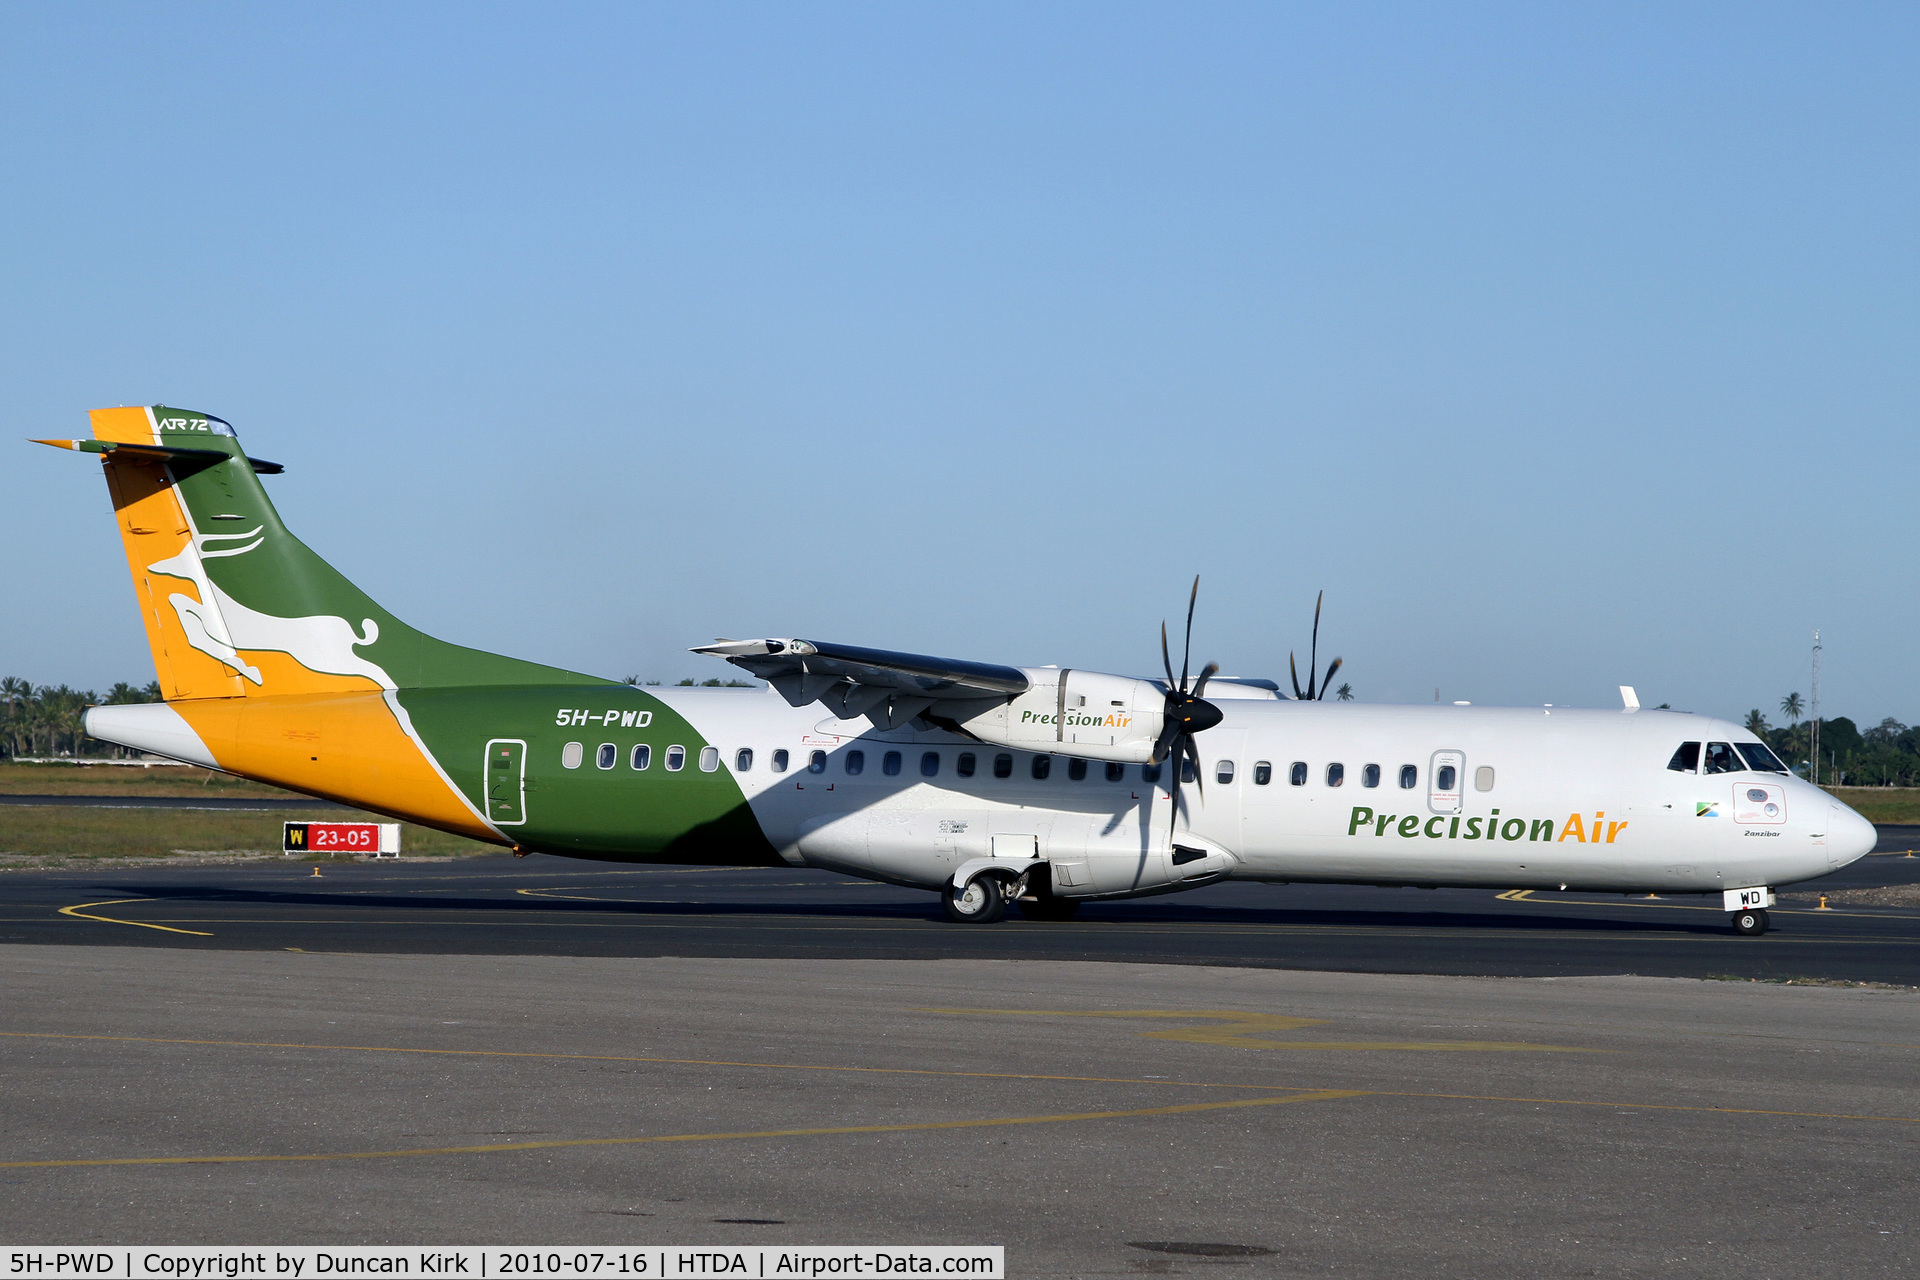 5H-PWD, 2009 ATR 72-212A C/N 880, Taxiing out for take-off